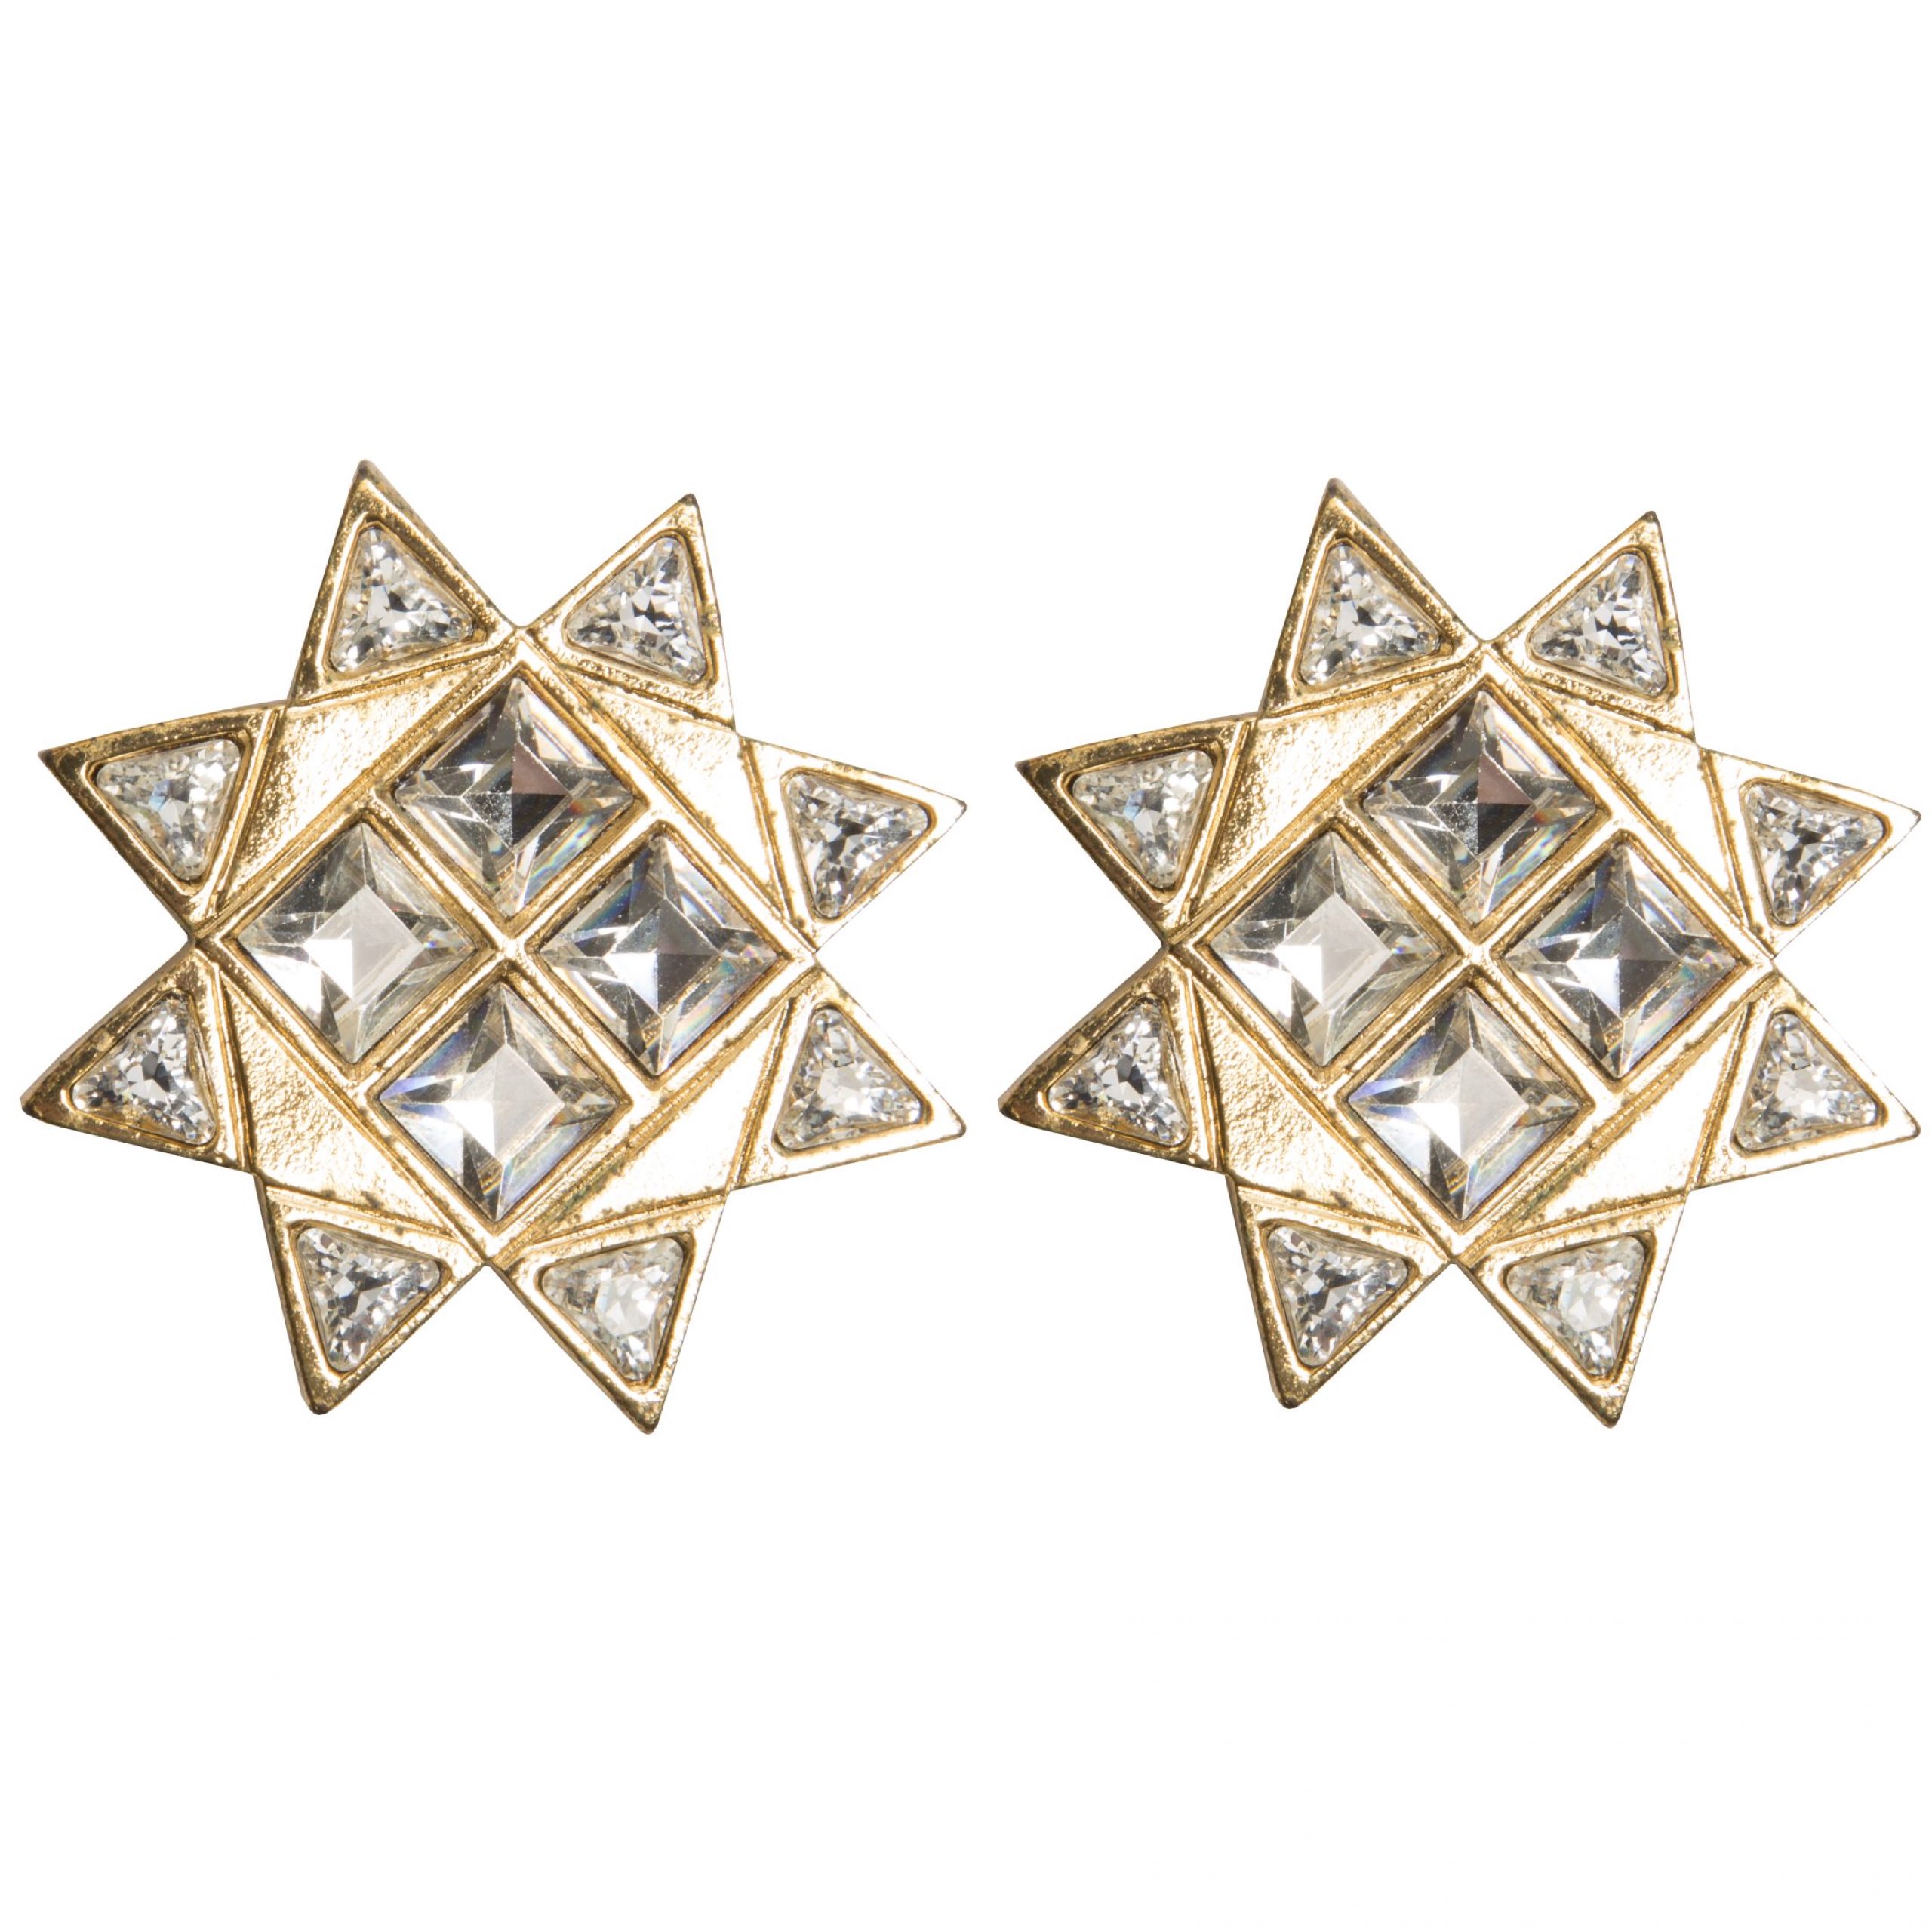 Vintage star shape haute couture crystal earrings